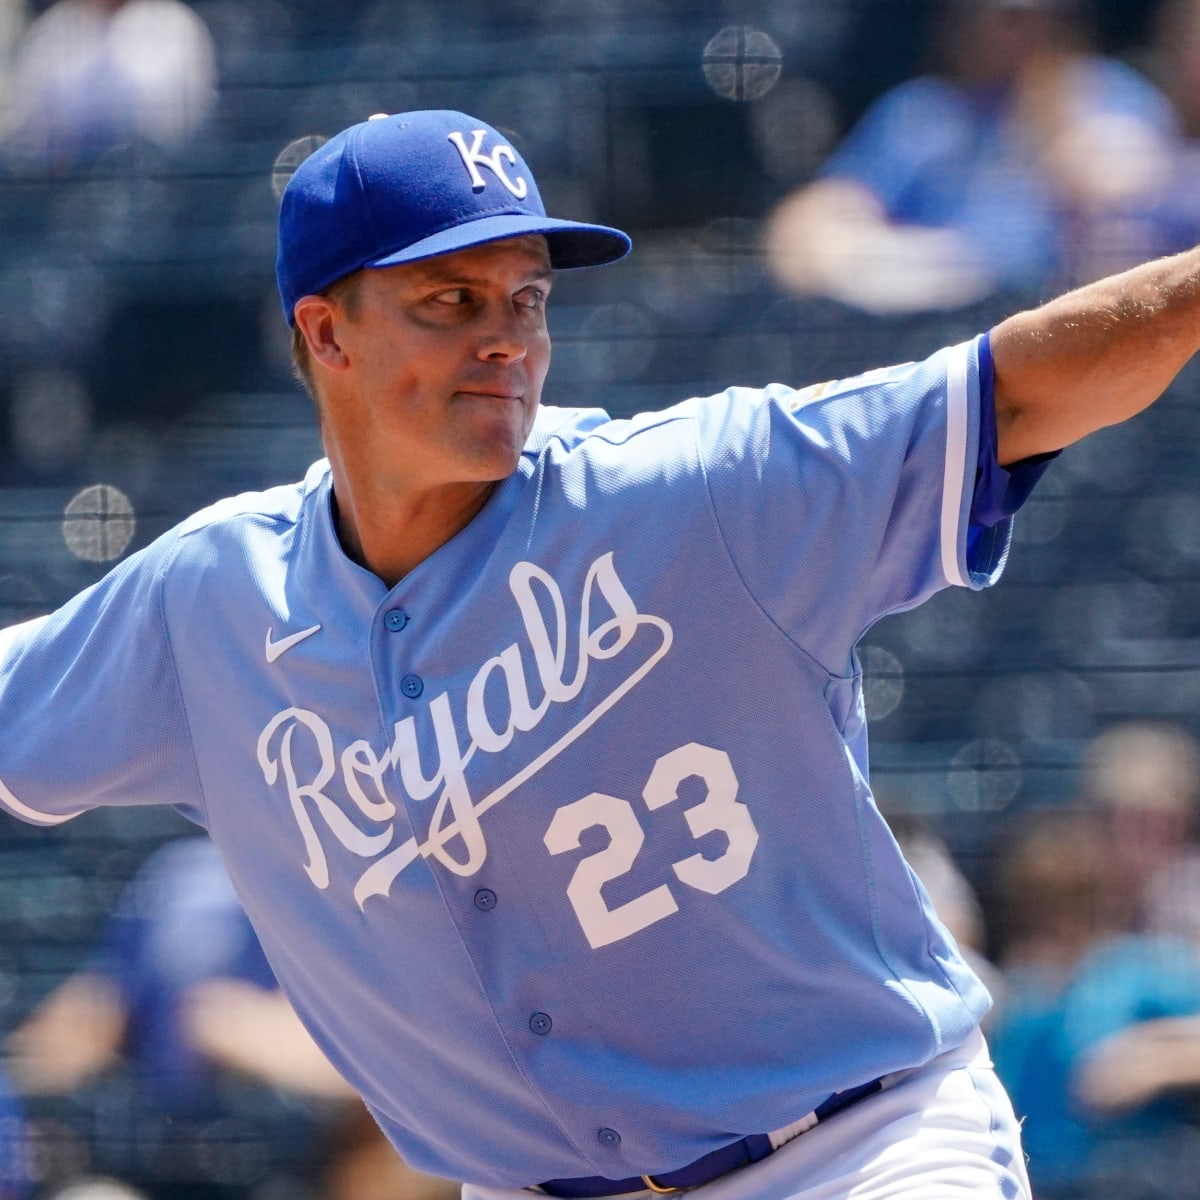 Kansas City Royals' Zack Greinke Moves Up Historic Strikeout Leaderboards -  Fastball